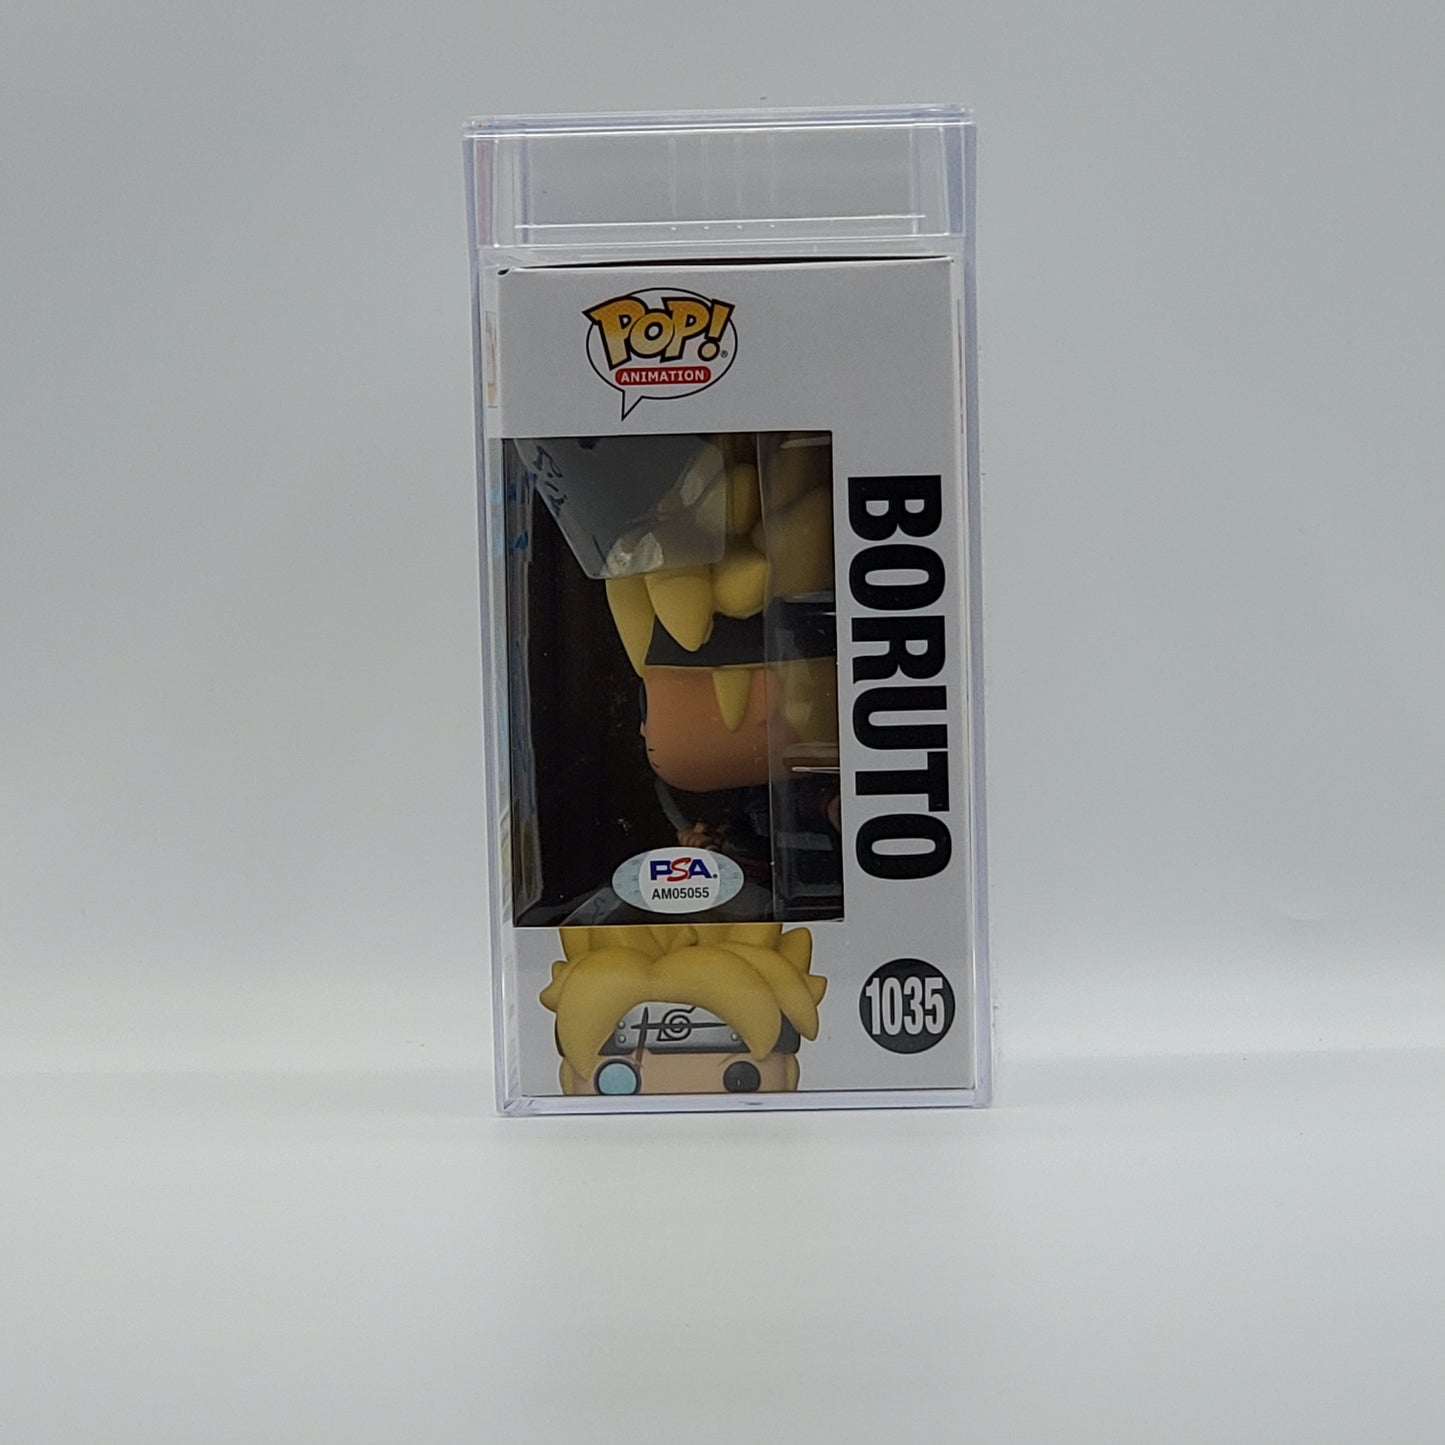 PSA ENCAPSULATED & SIGNATURE CERTIFIED - BORUTO - GLOWS IN THE DARK - ENTERTAINMENT EARTH EXCLUSIVE (SIGNED BY AMANDA MILLER)